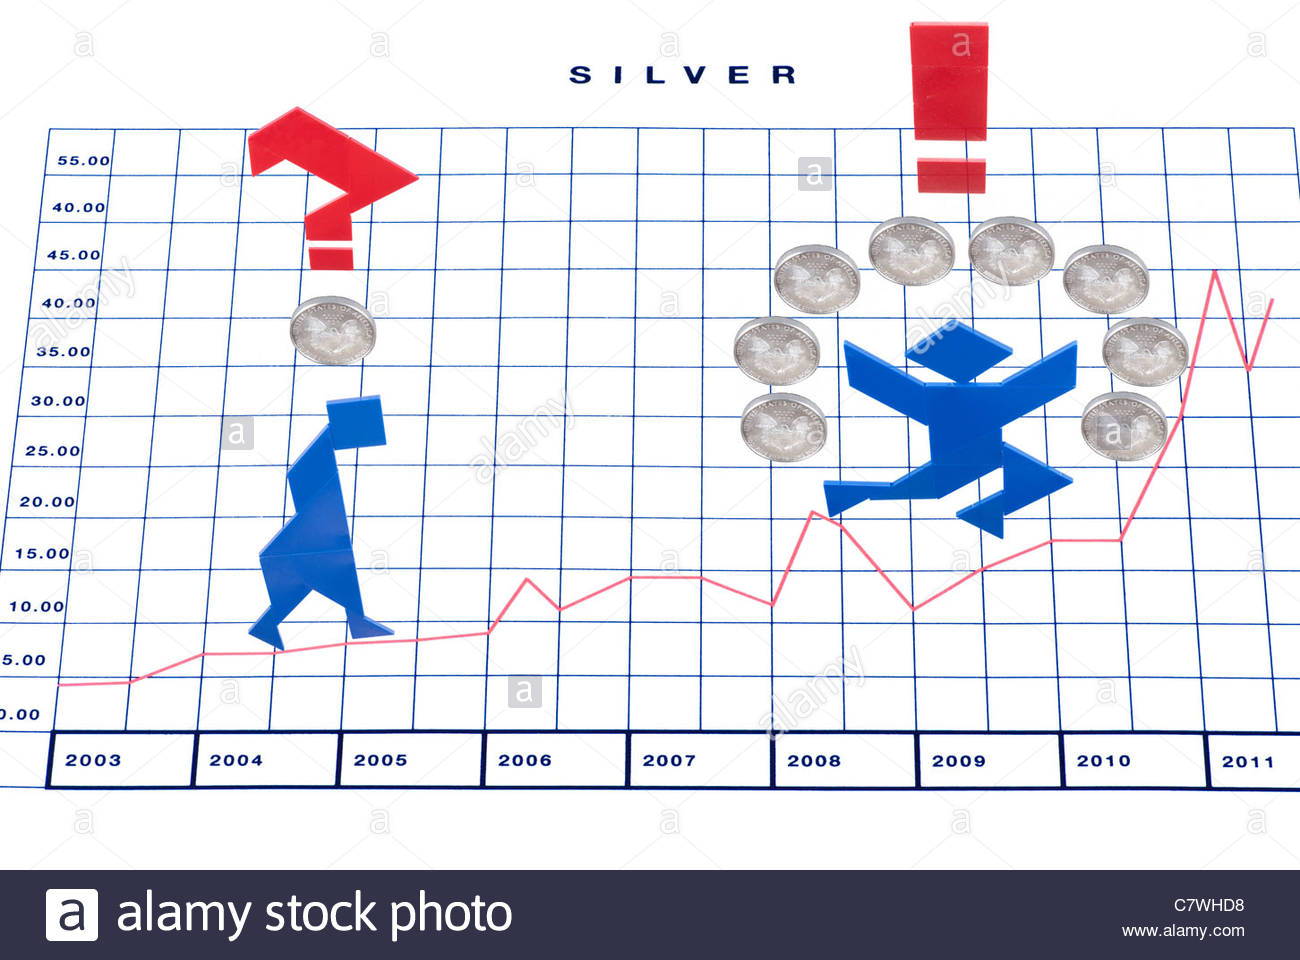 2008 Silver Price Chart